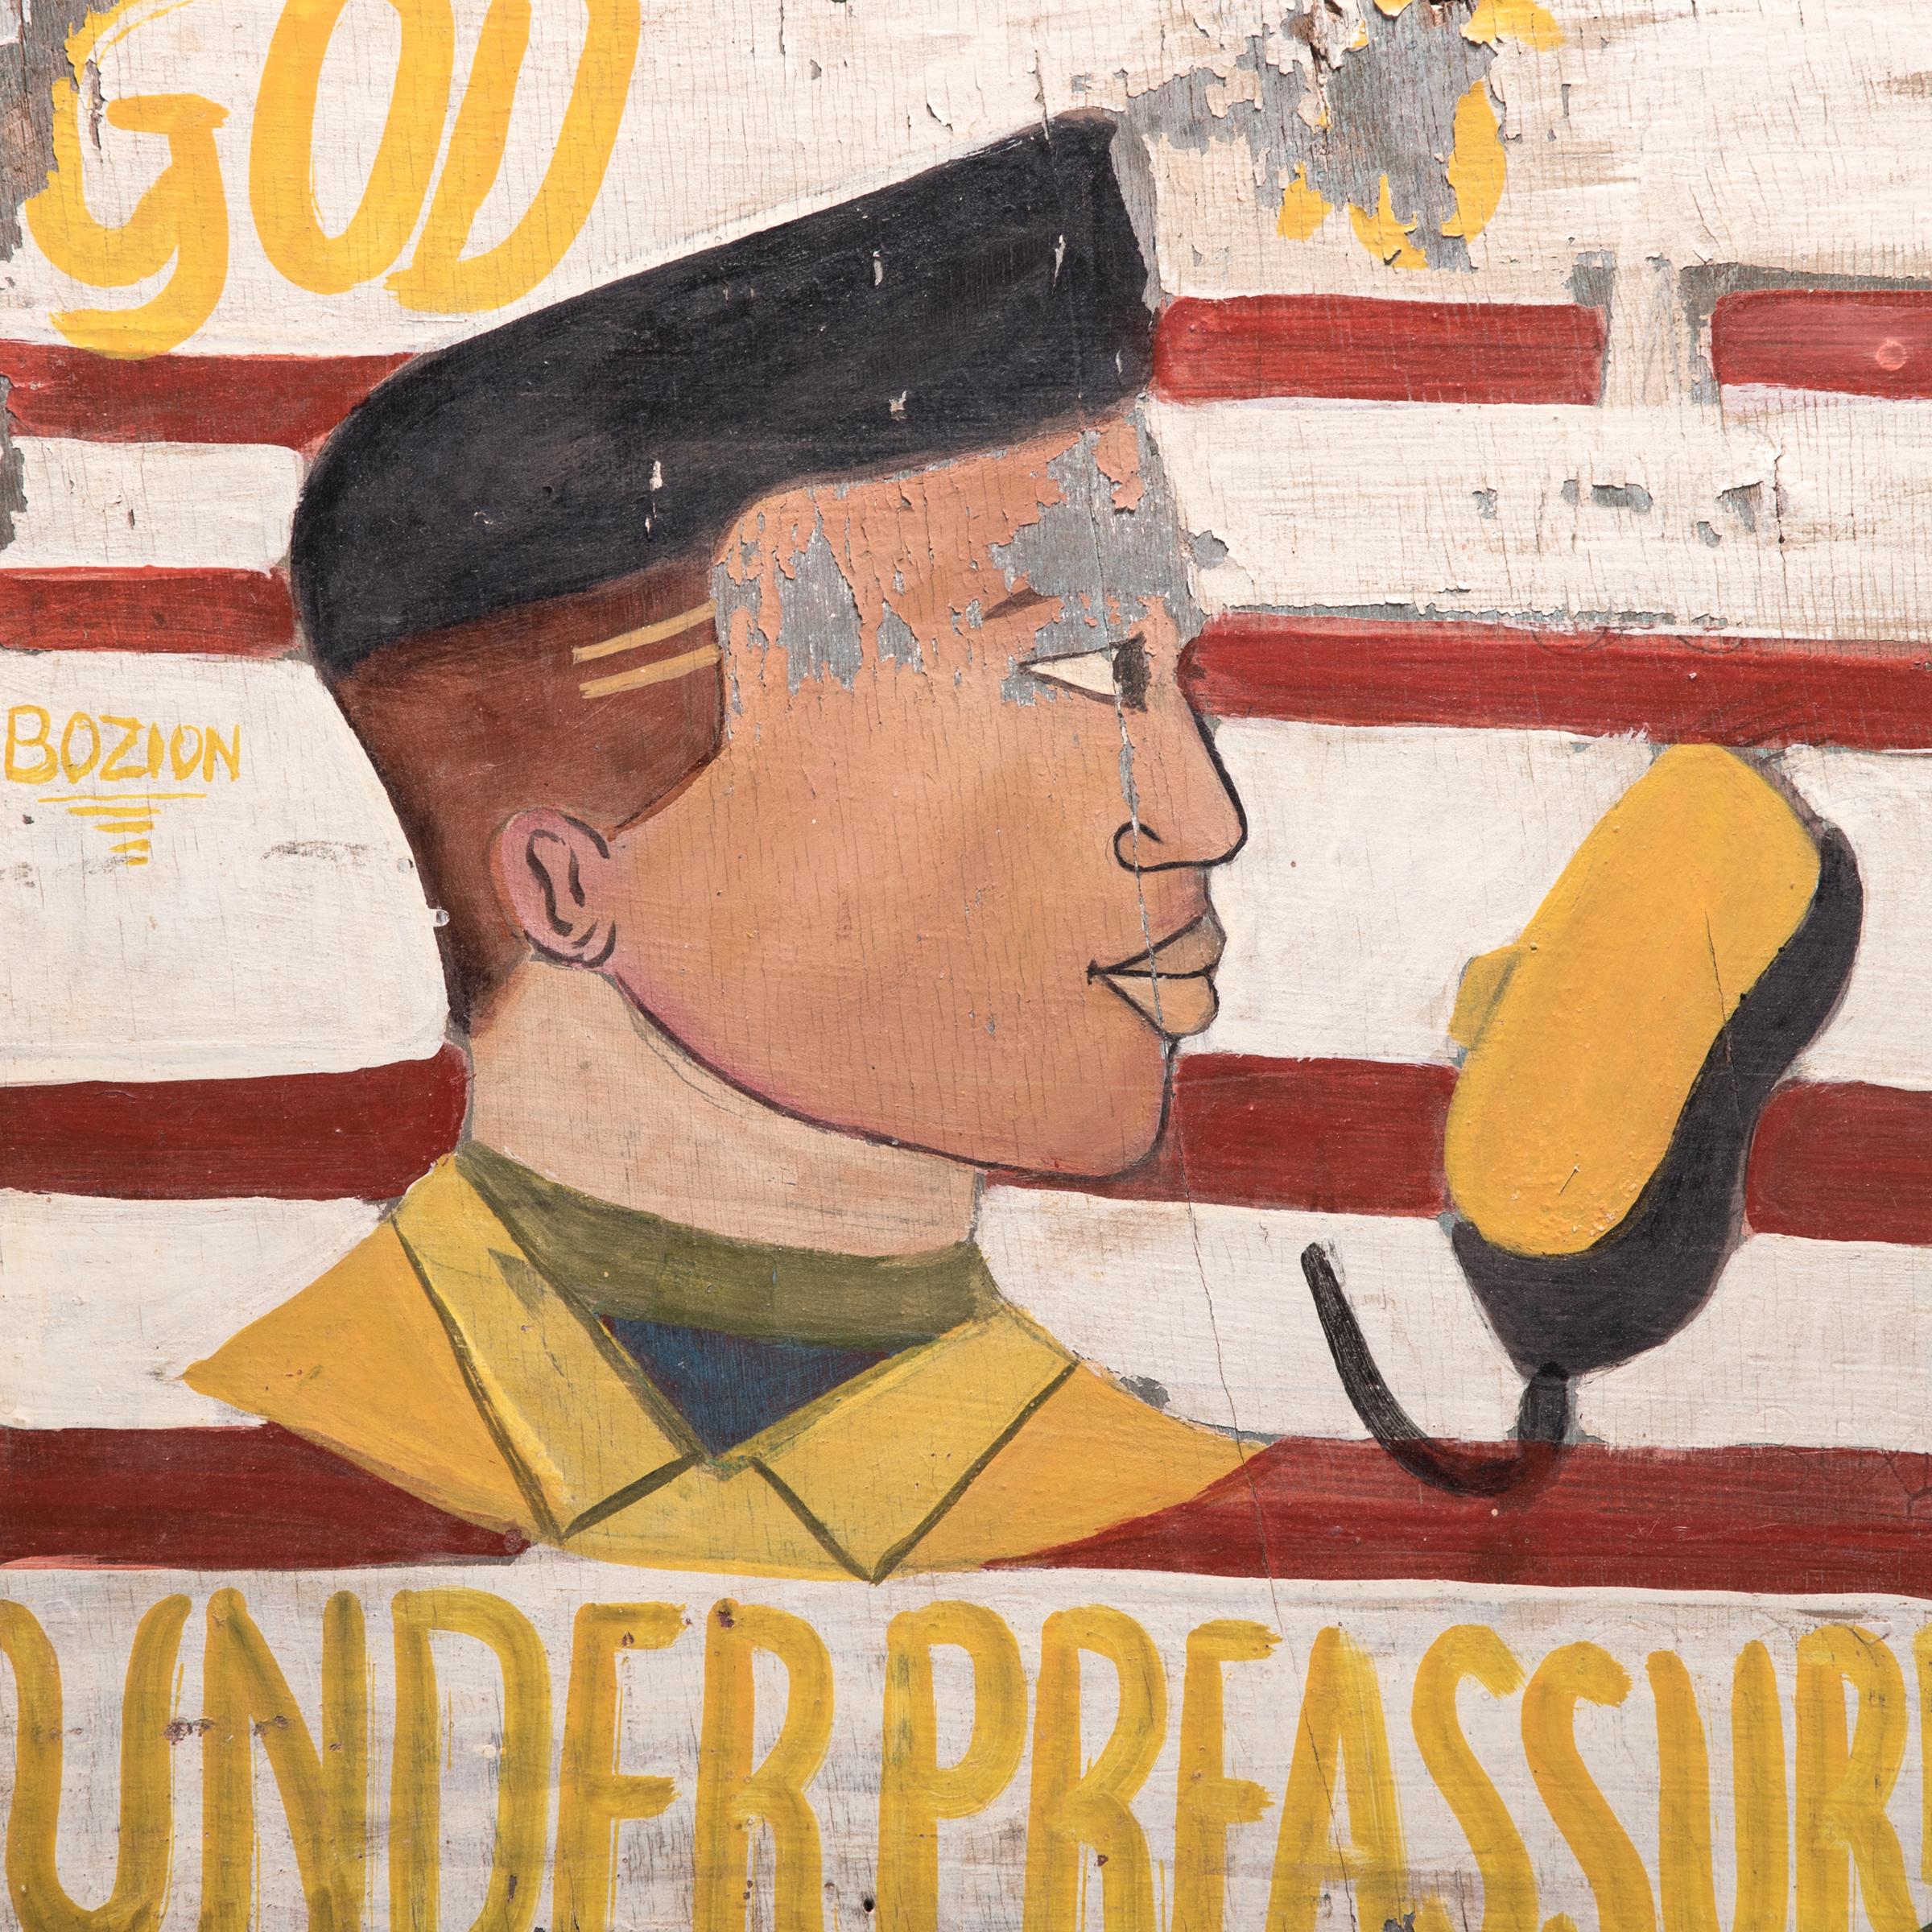 Swinging from trees or mounted to buildings, barbershop signs are fascinating examples of pop and Folk Art in Africa. Each sign was painted to communicate the unique personality of the barber, expressing both their hairdressing options, and the